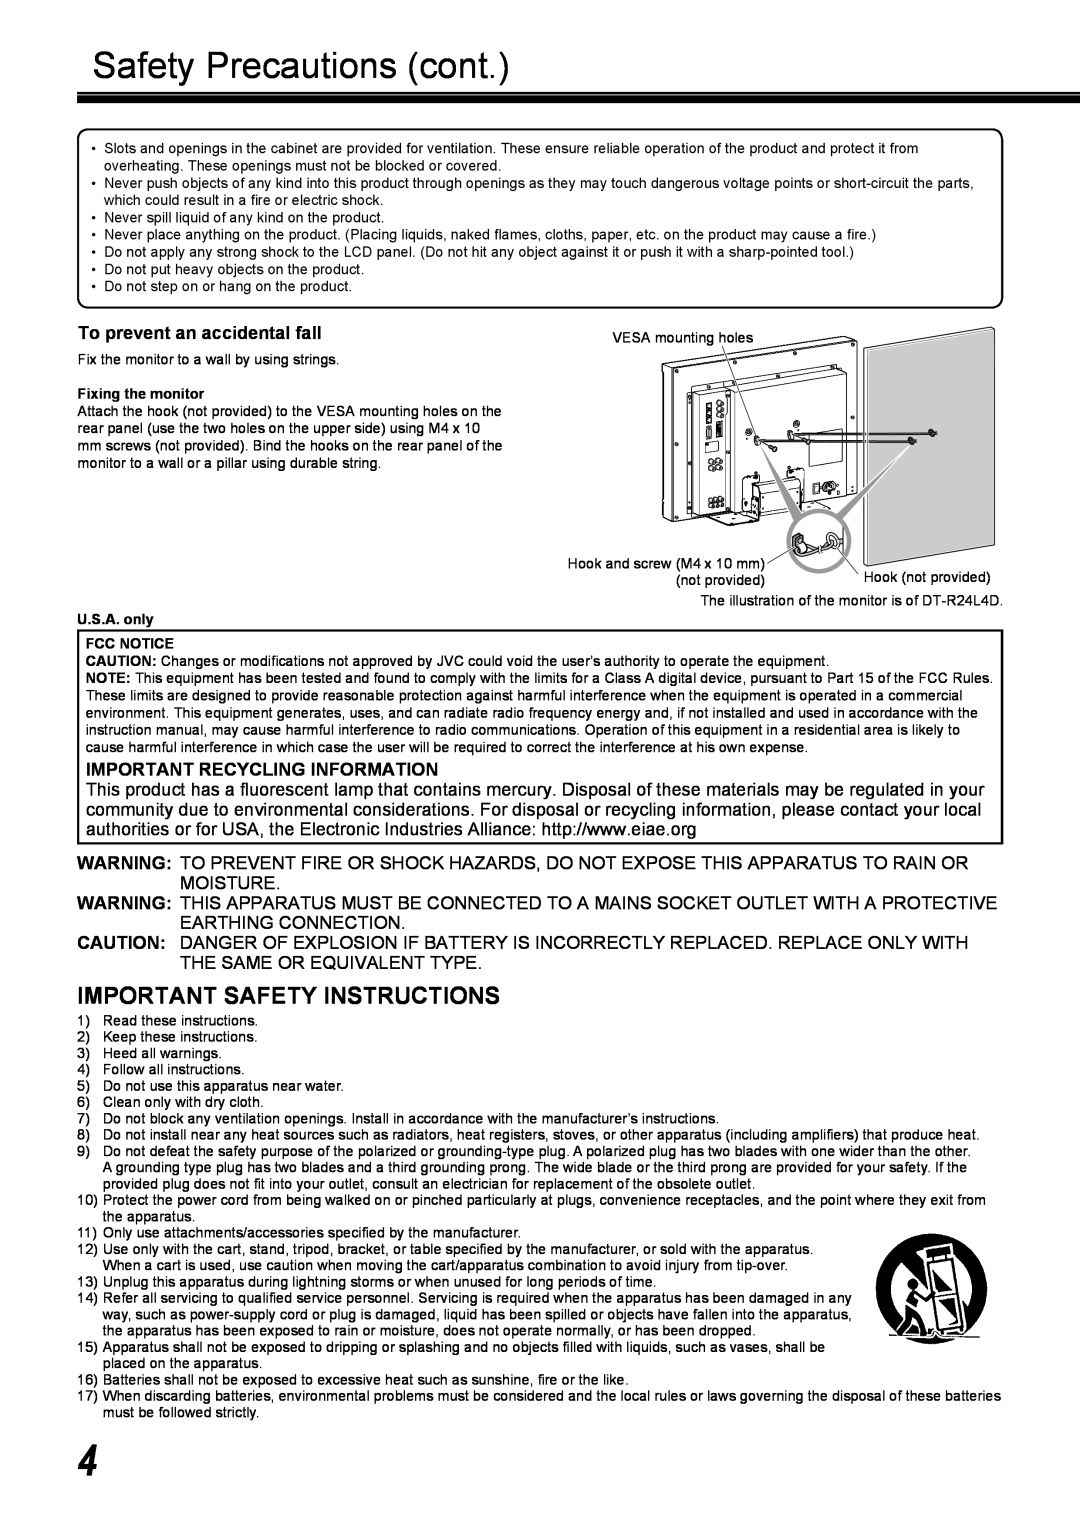 JVC DT-R17L4D, DT-R24L4D user service Safety Precautions cont, Important Safety Instructions, To prevent an accidental fall 